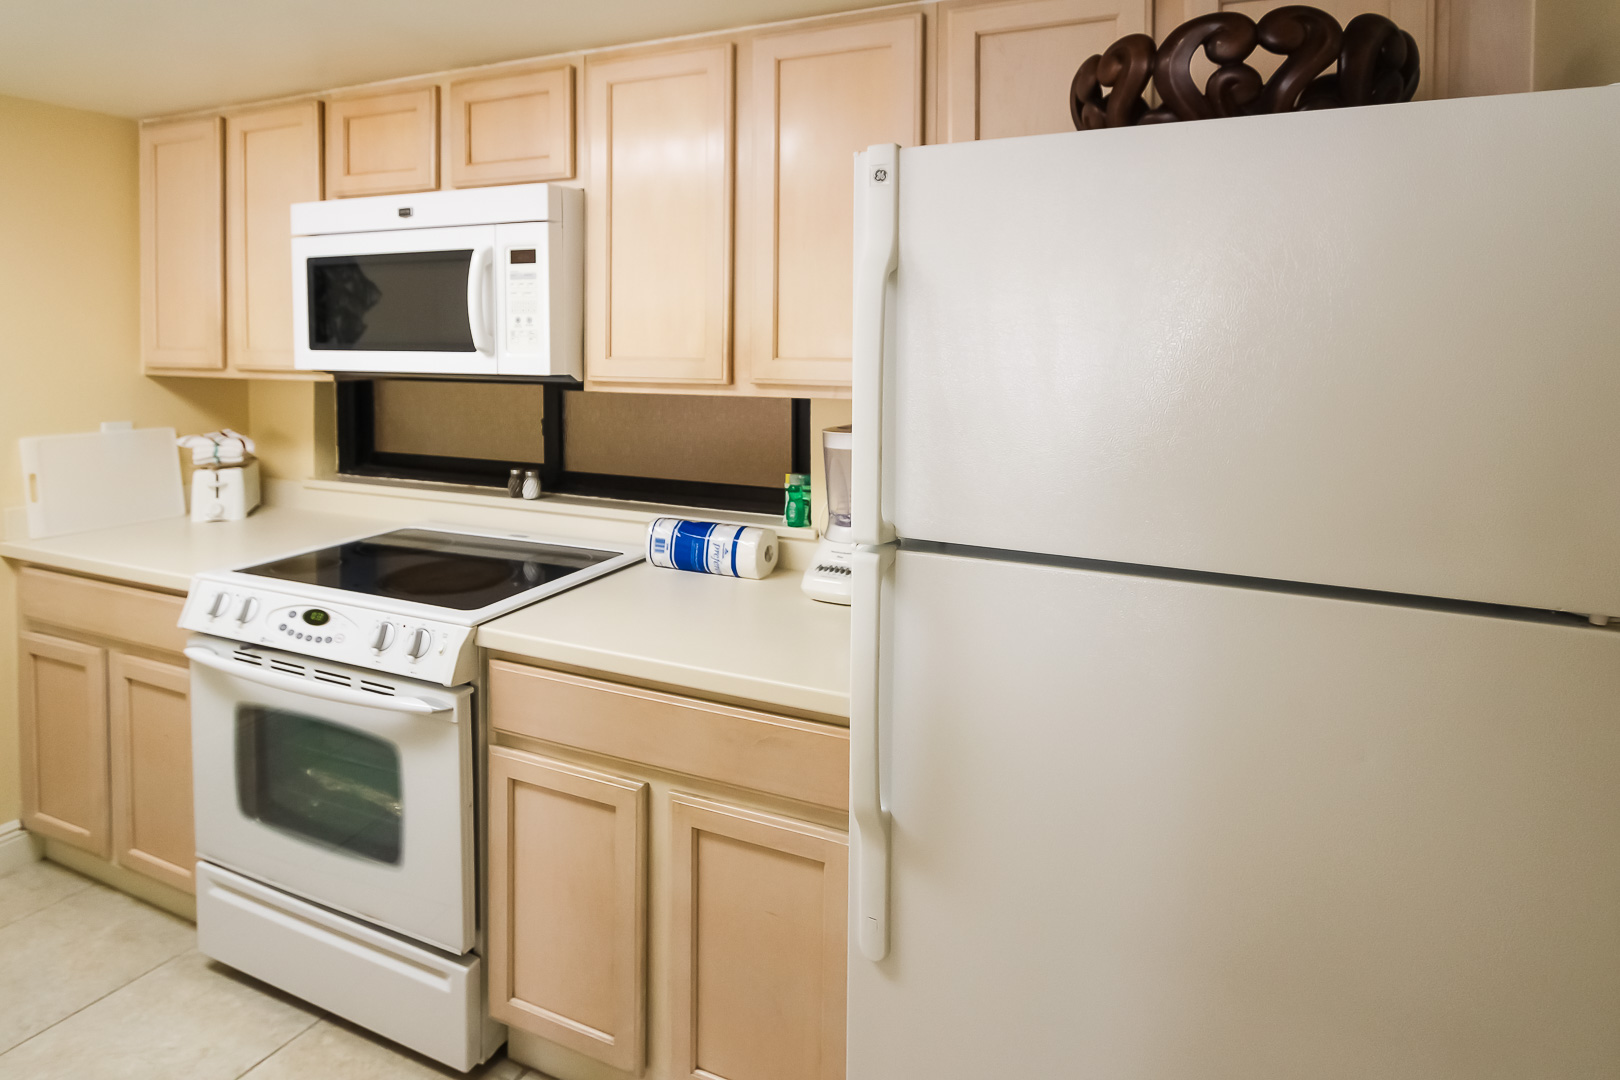 A fully equipped kitchen at VRI's Royale Beach Tennis Club in Texas.